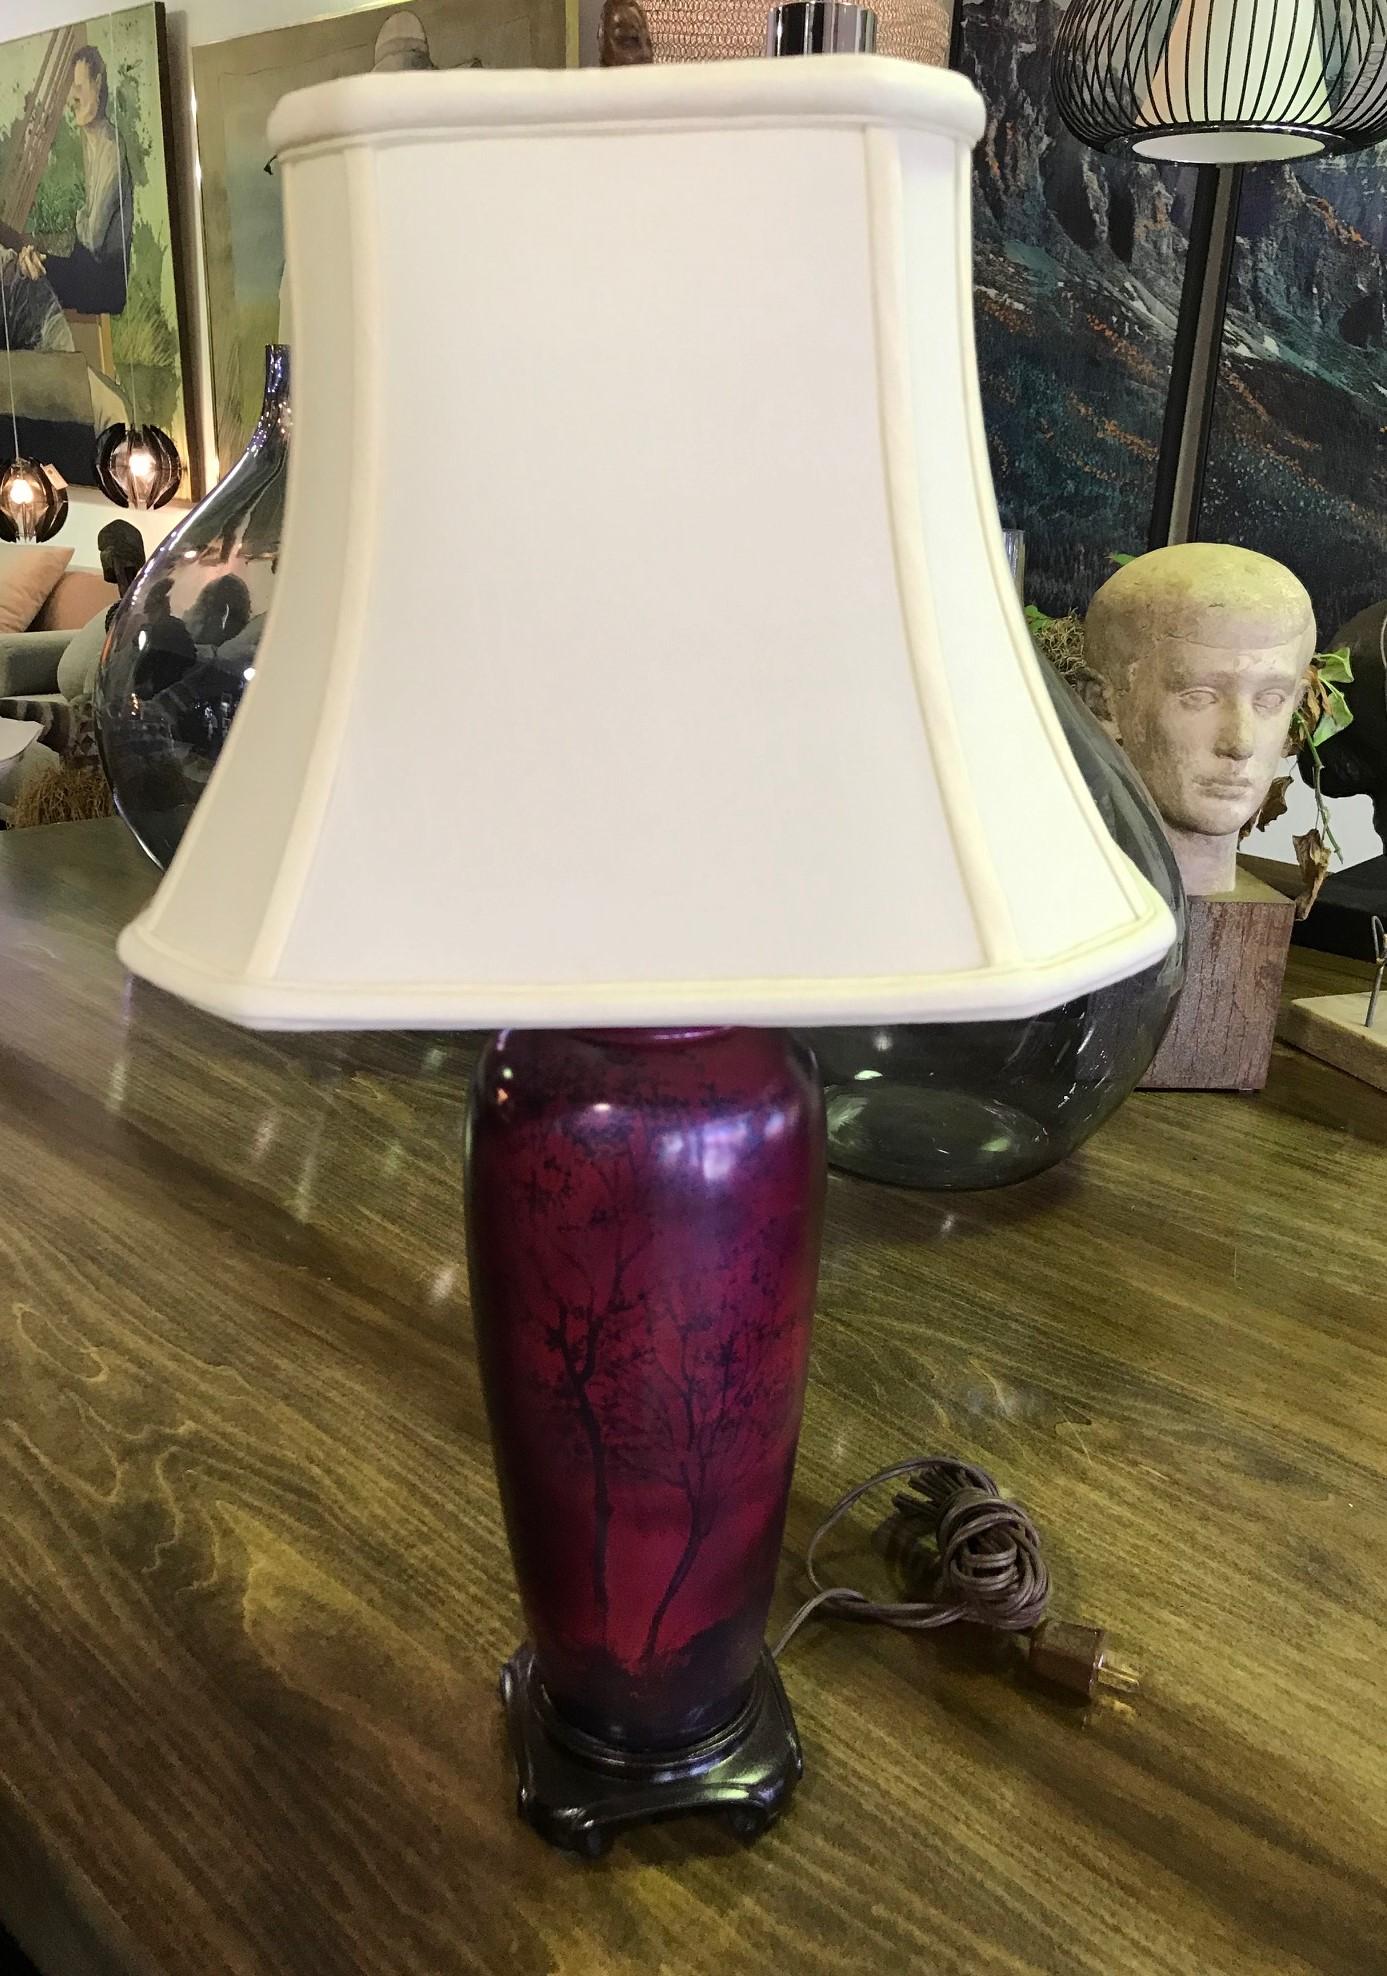 A wonderful lamp with shimmering rich colors. Finely painted. Would stand out in about any setting.

Dimensions of lamp: 23.5